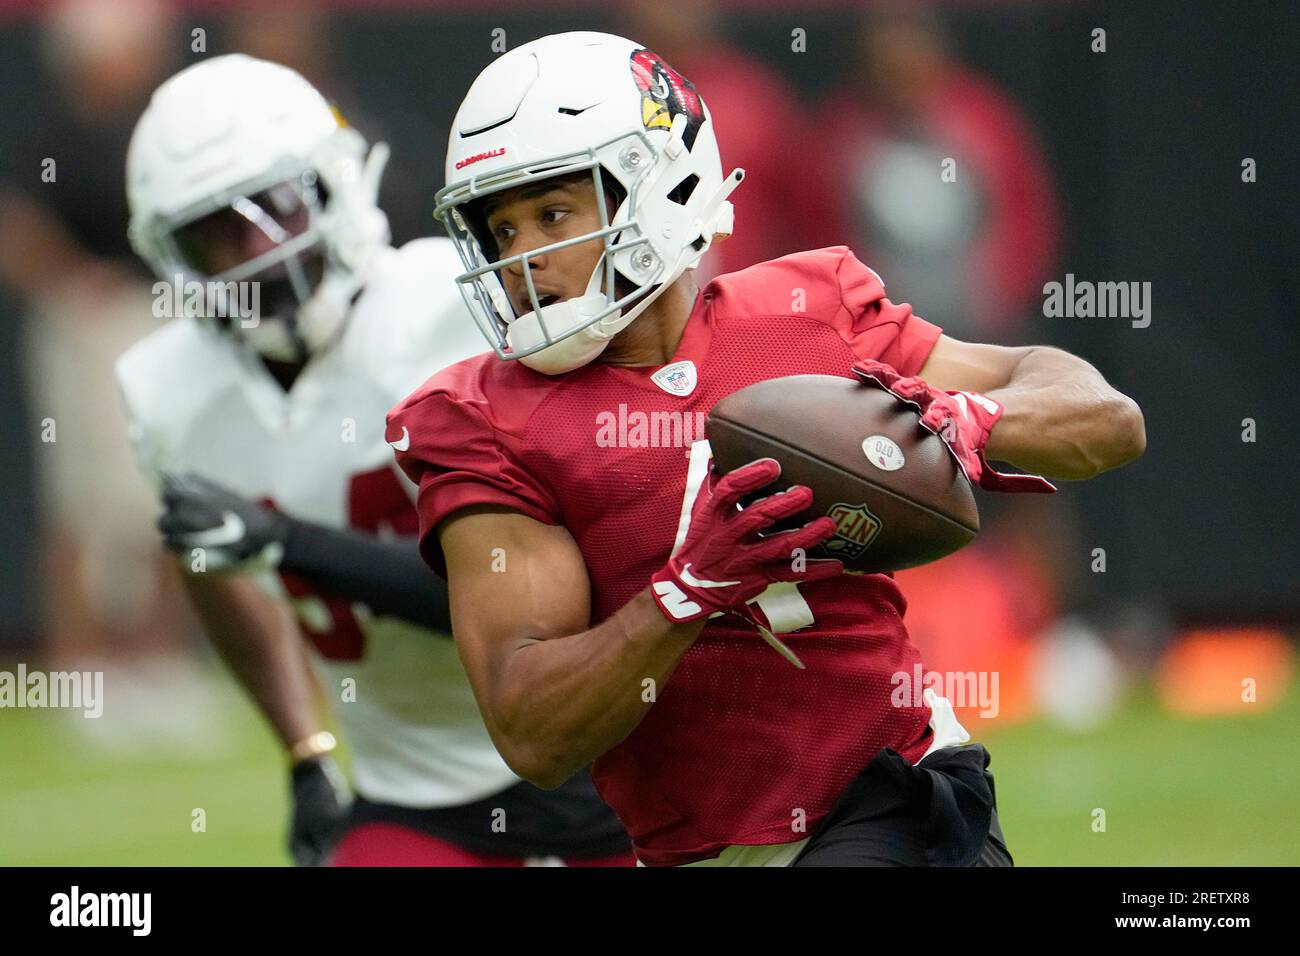 Arizona Cardinals wide receiver Rondale Moore, right, runs with